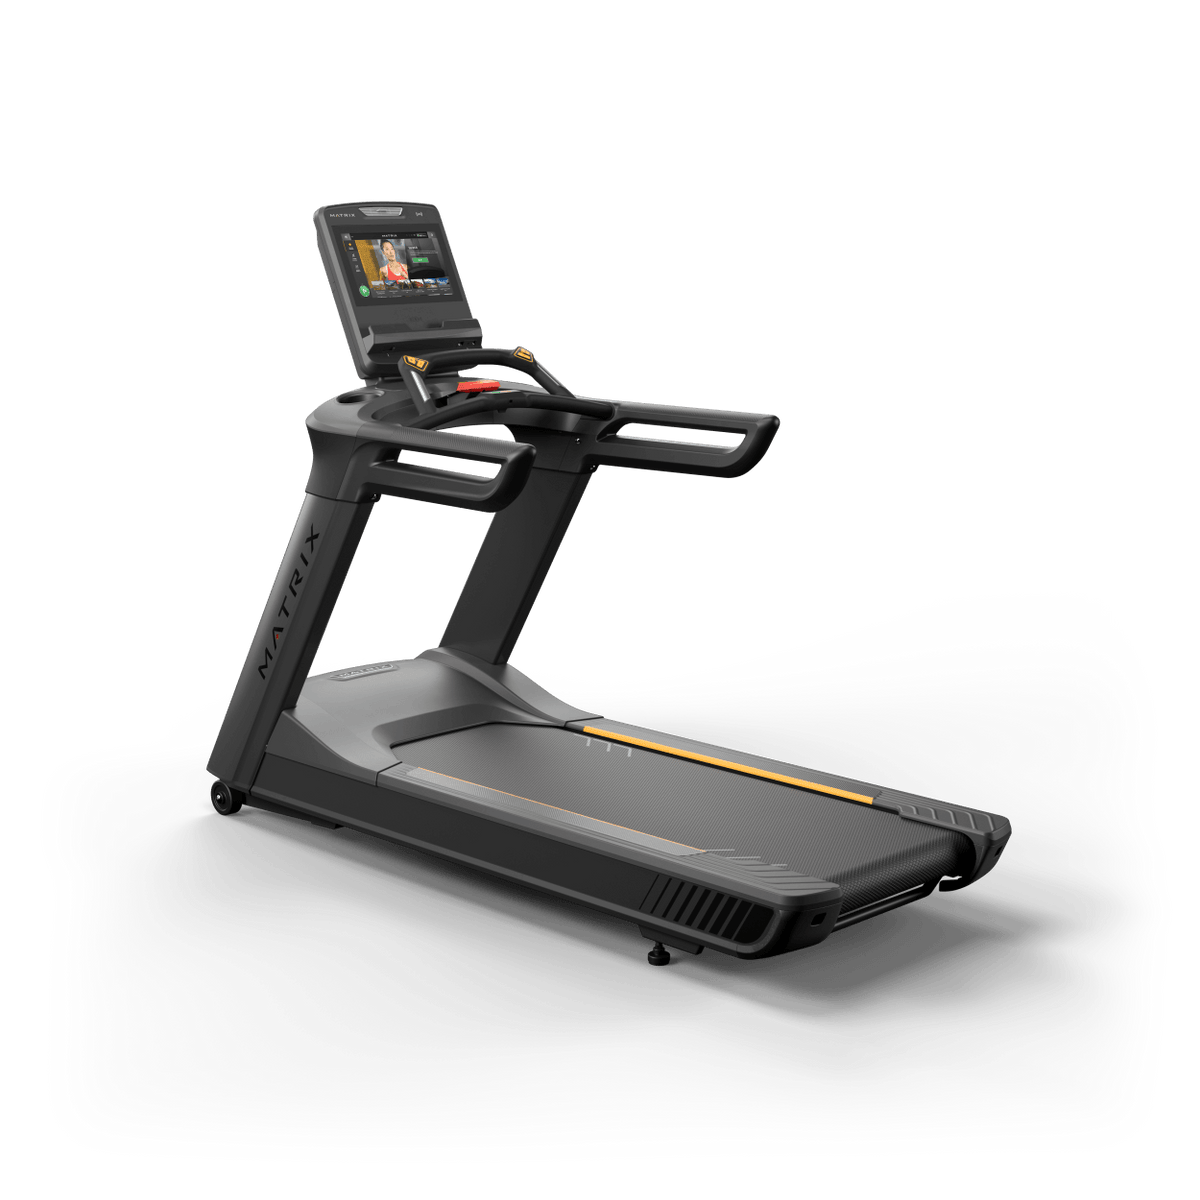 Matrix Performance Treadmill with Touch Console full view | Fitness Experience